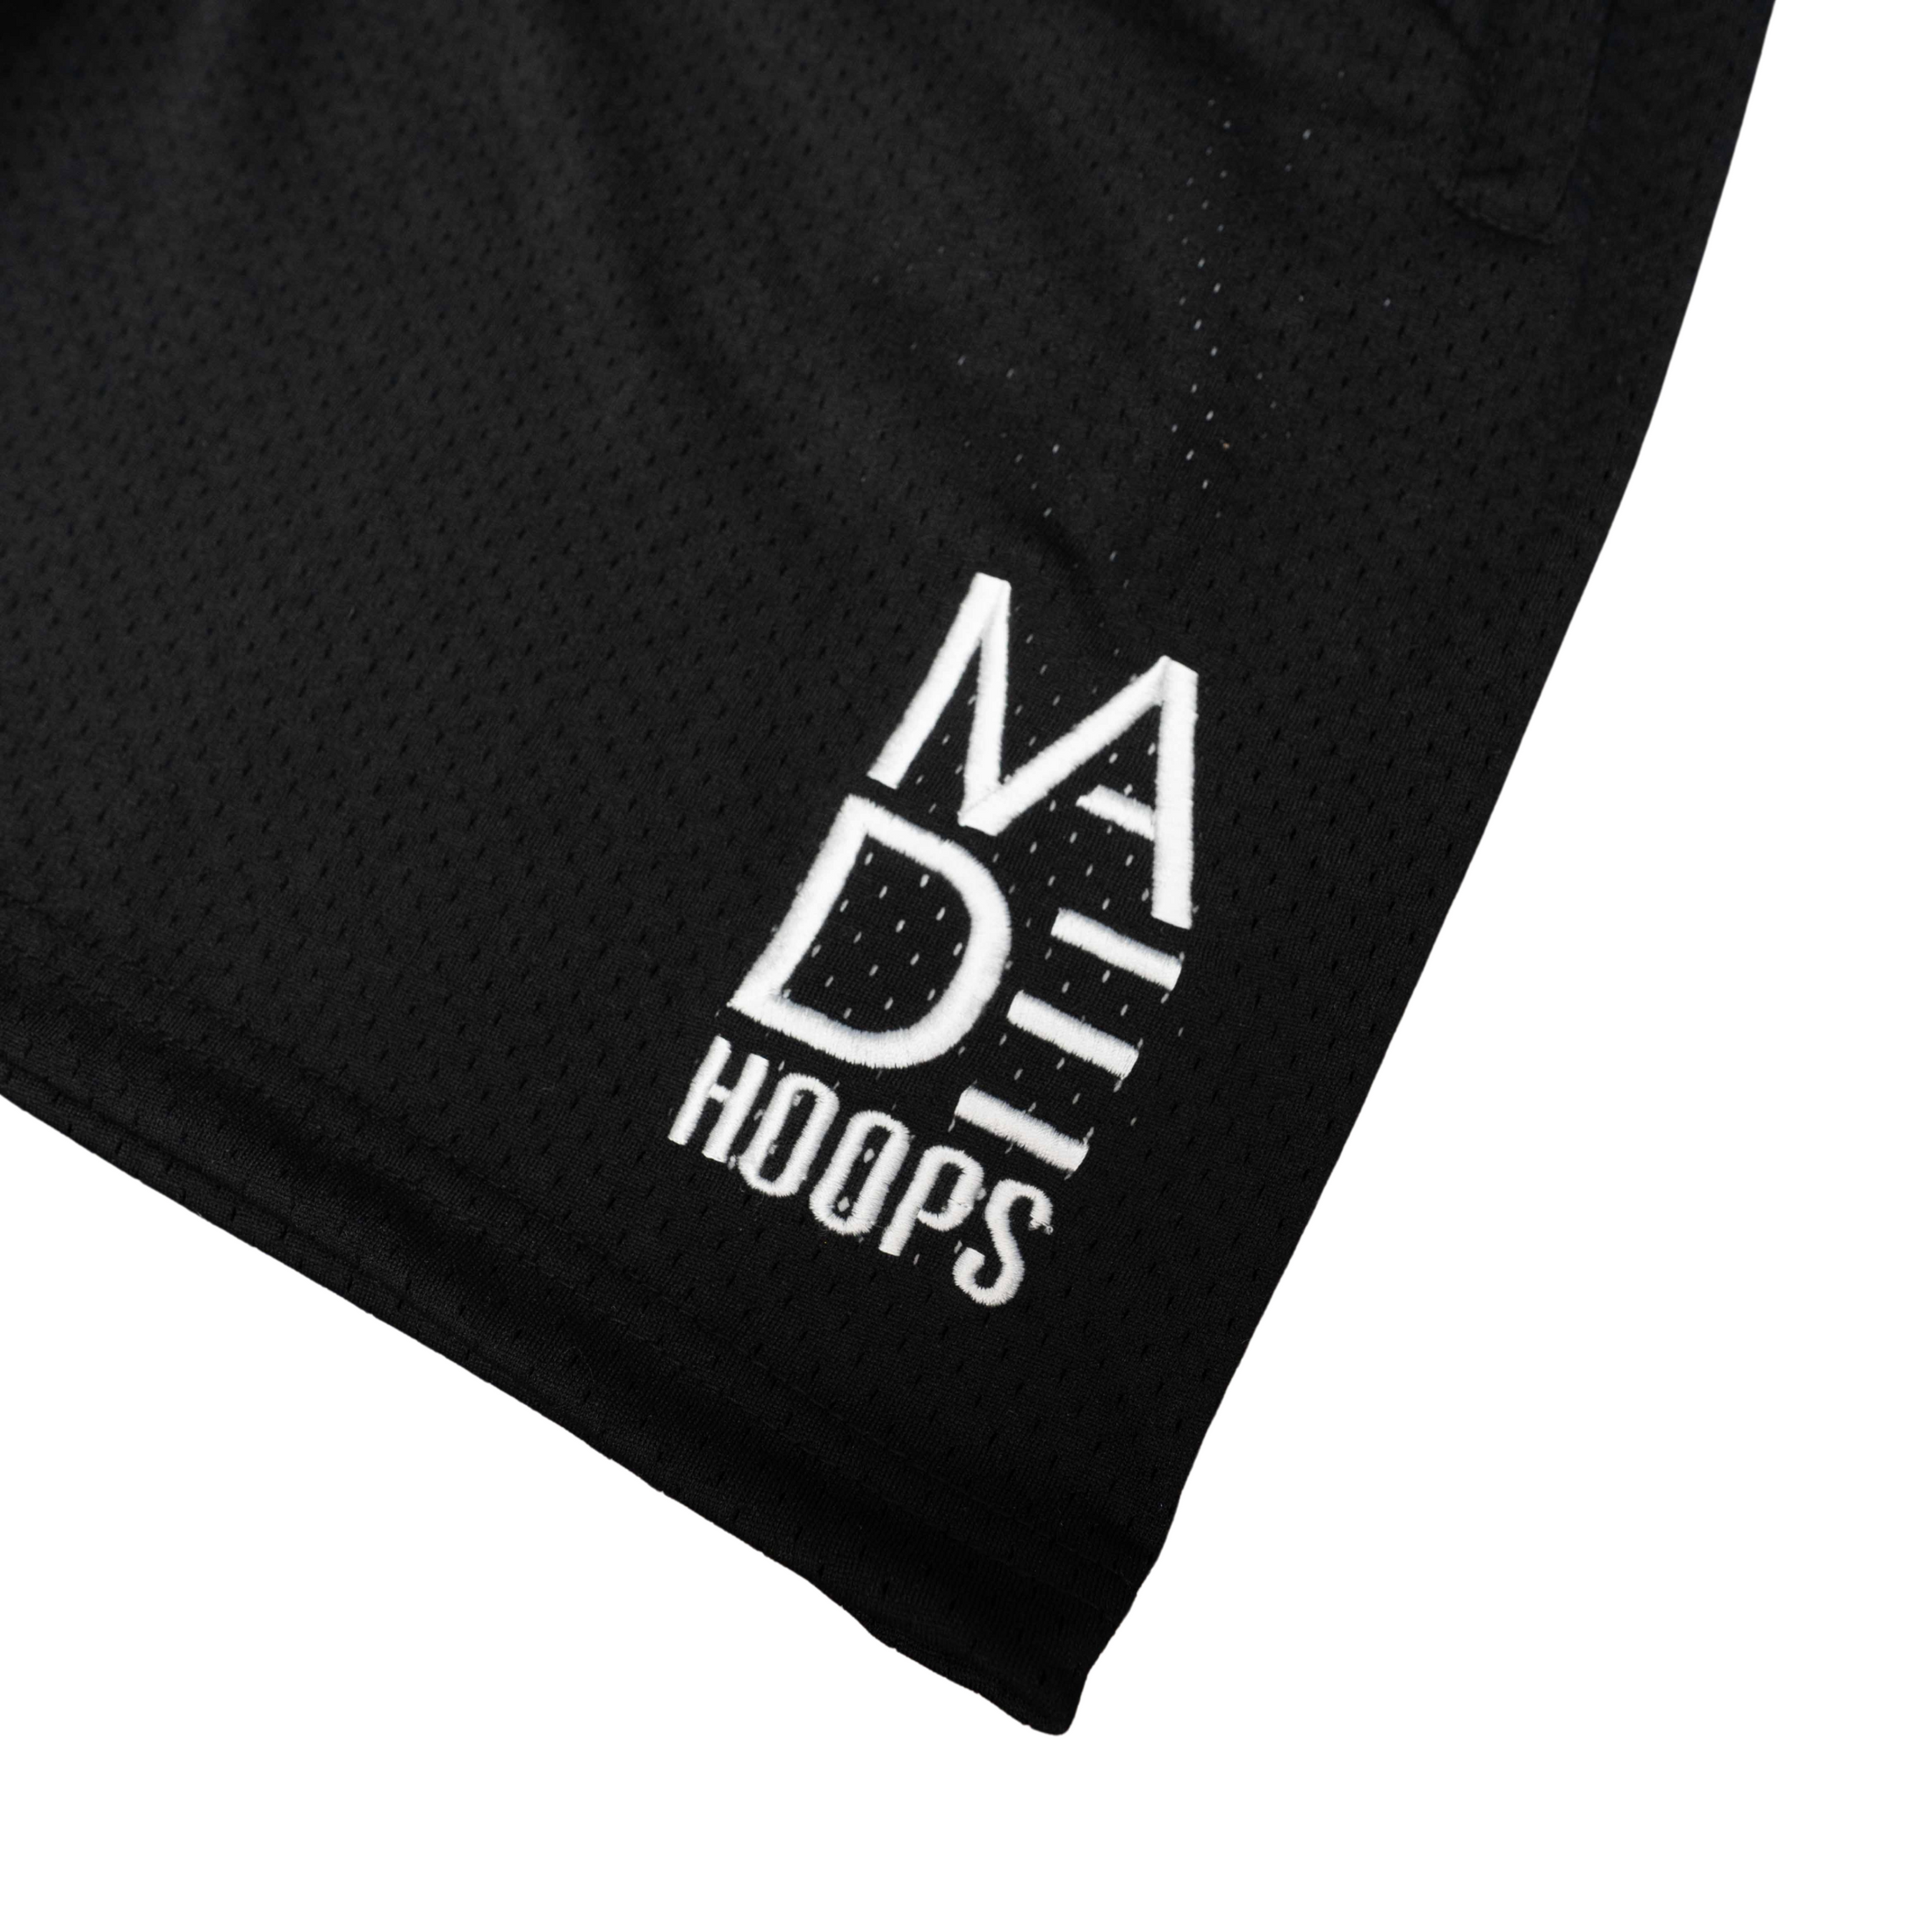 Essential Embroidered Logo Shorts | Black